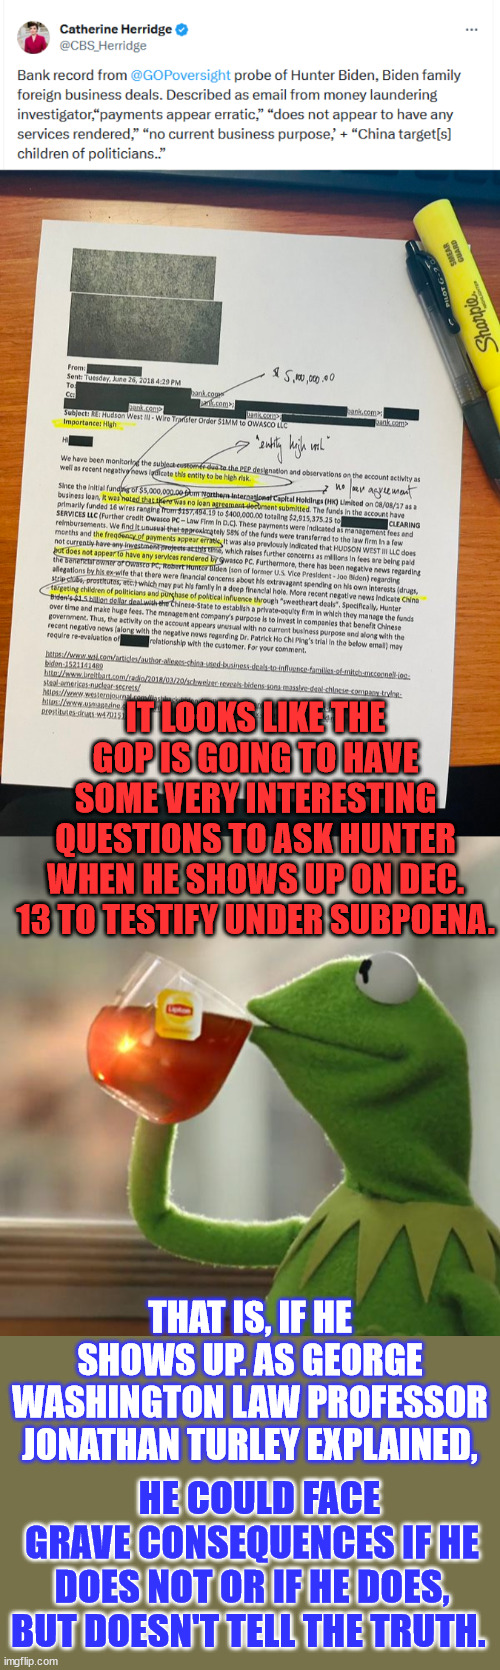 Looks like Hunter has some explaining to do... | IT LOOKS LIKE THE GOP IS GOING TO HAVE SOME VERY INTERESTING QUESTIONS TO ASK HUNTER WHEN HE SHOWS UP ON DEC. 13 TO TESTIFY UNDER SUBPOENA. THAT IS, IF HE SHOWS UP. AS GEORGE WASHINGTON LAW PROFESSOR JONATHAN TURLEY EXPLAINED, HE COULD FACE GRAVE CONSEQUENCES IF HE DOES NOT OR IF HE DOES, BUT DOESN'T TELL THE TRUTH. | image tagged in memes,but that's none of my business,hunter biden,i can explain | made w/ Imgflip meme maker